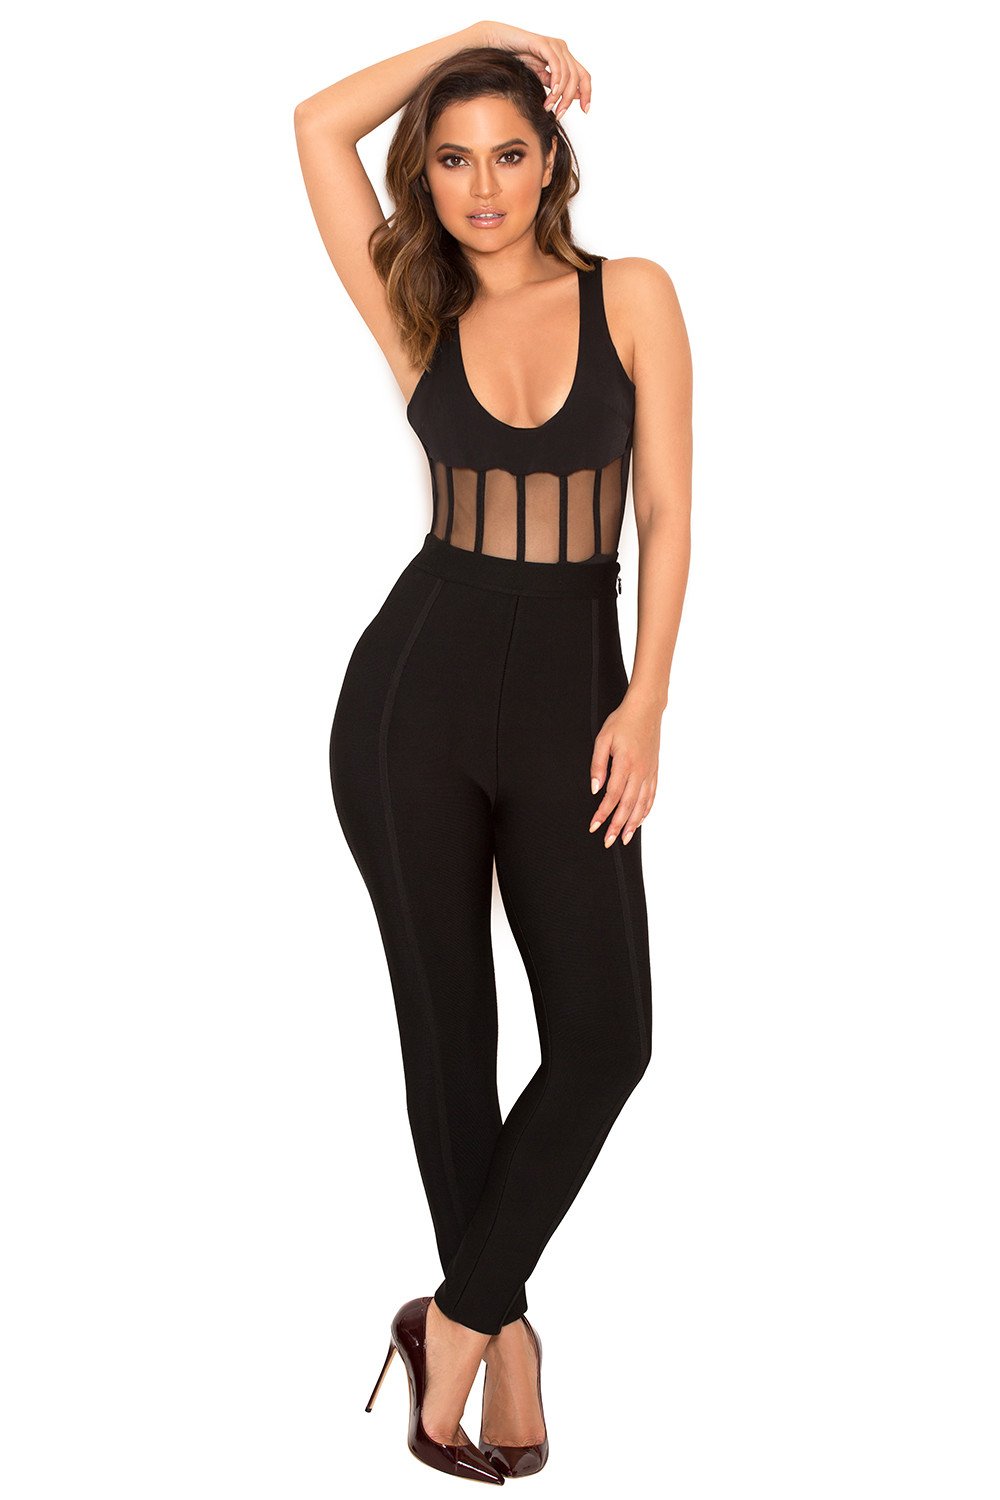 'Carballa' Black Silky Jersey and Mesh Bodysuit - SALE